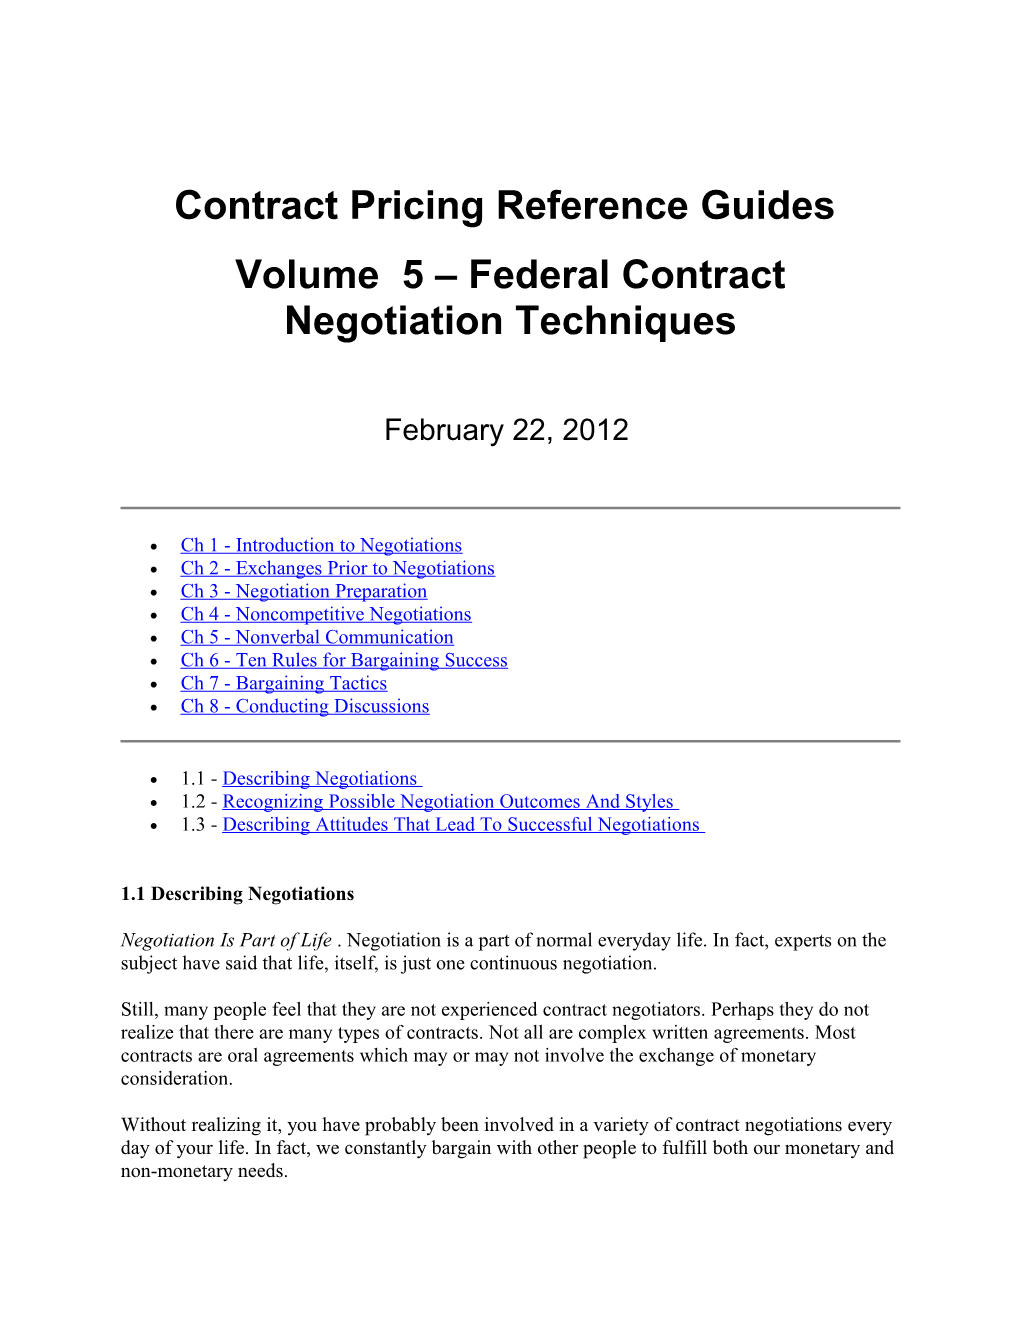 Contract Pricing Reference Guides Volume 5 Federal Contract Negotiation Techniques